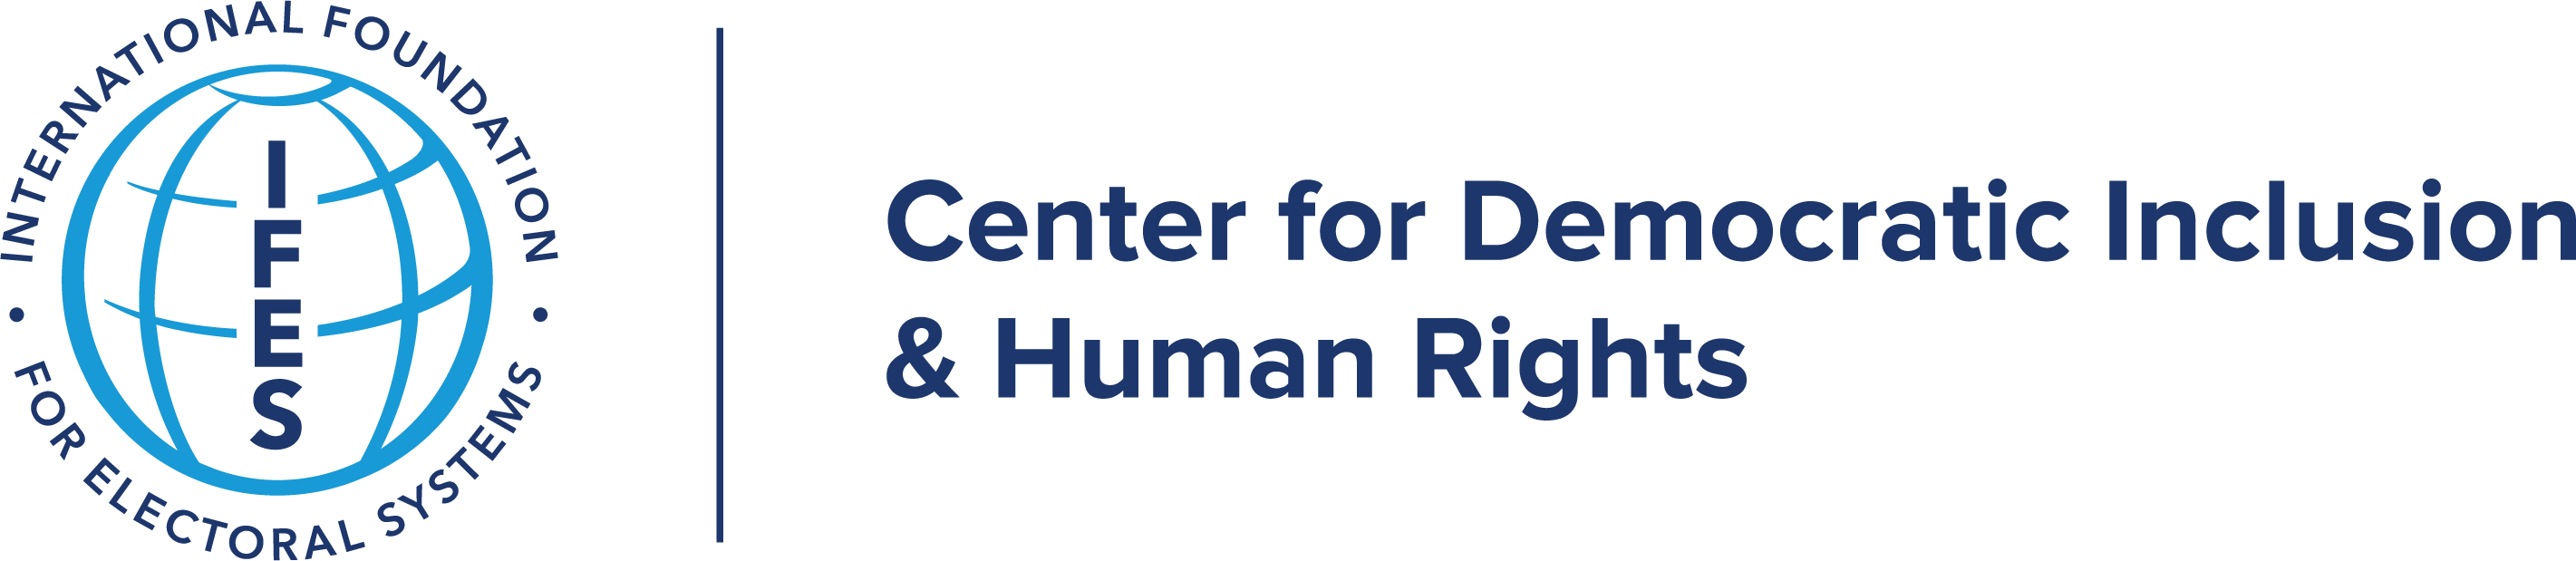 IFES Center for Democratic Inclusion & Human Rights Logo